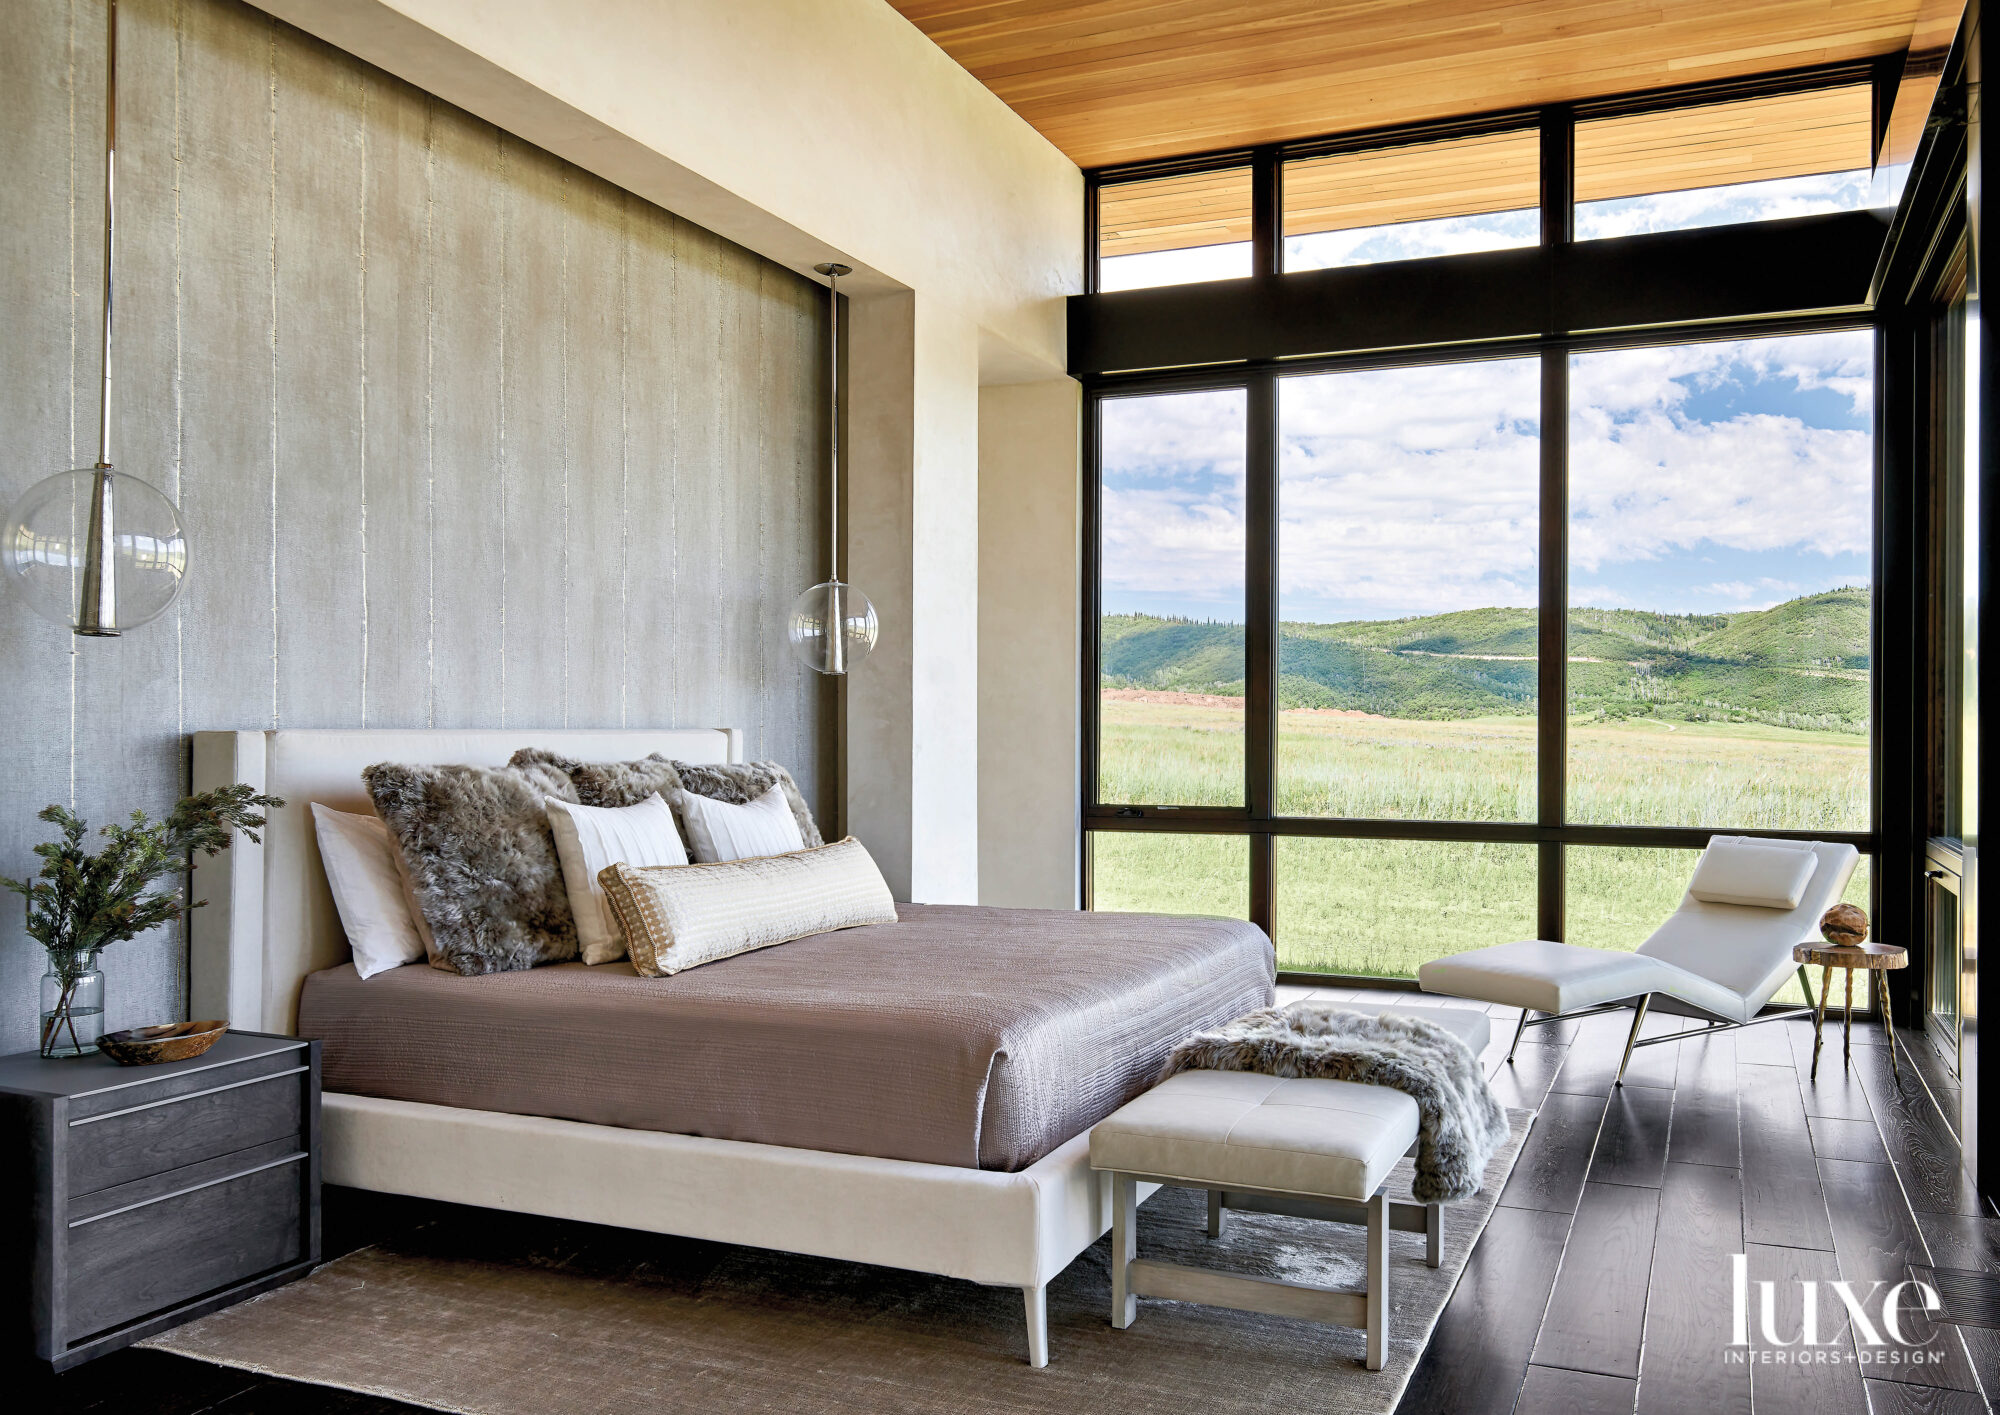 A white bed frame contrasts against grey gold-leaf wallcovering.